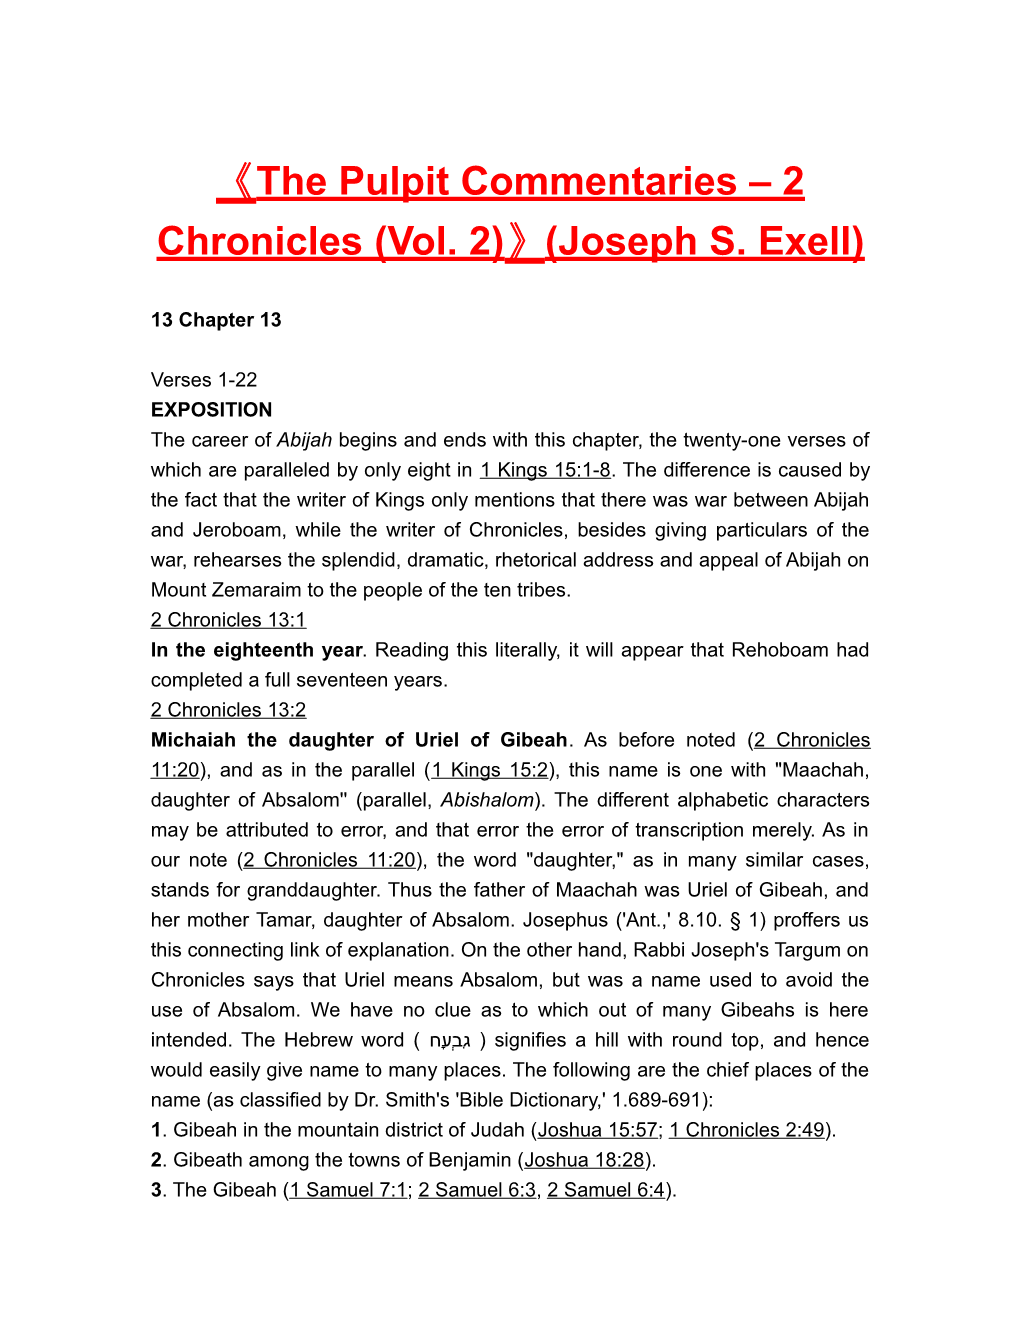 The Pulpit Commentaries 2 Chronicles (Vol. 2) (Joseph S. Exell)